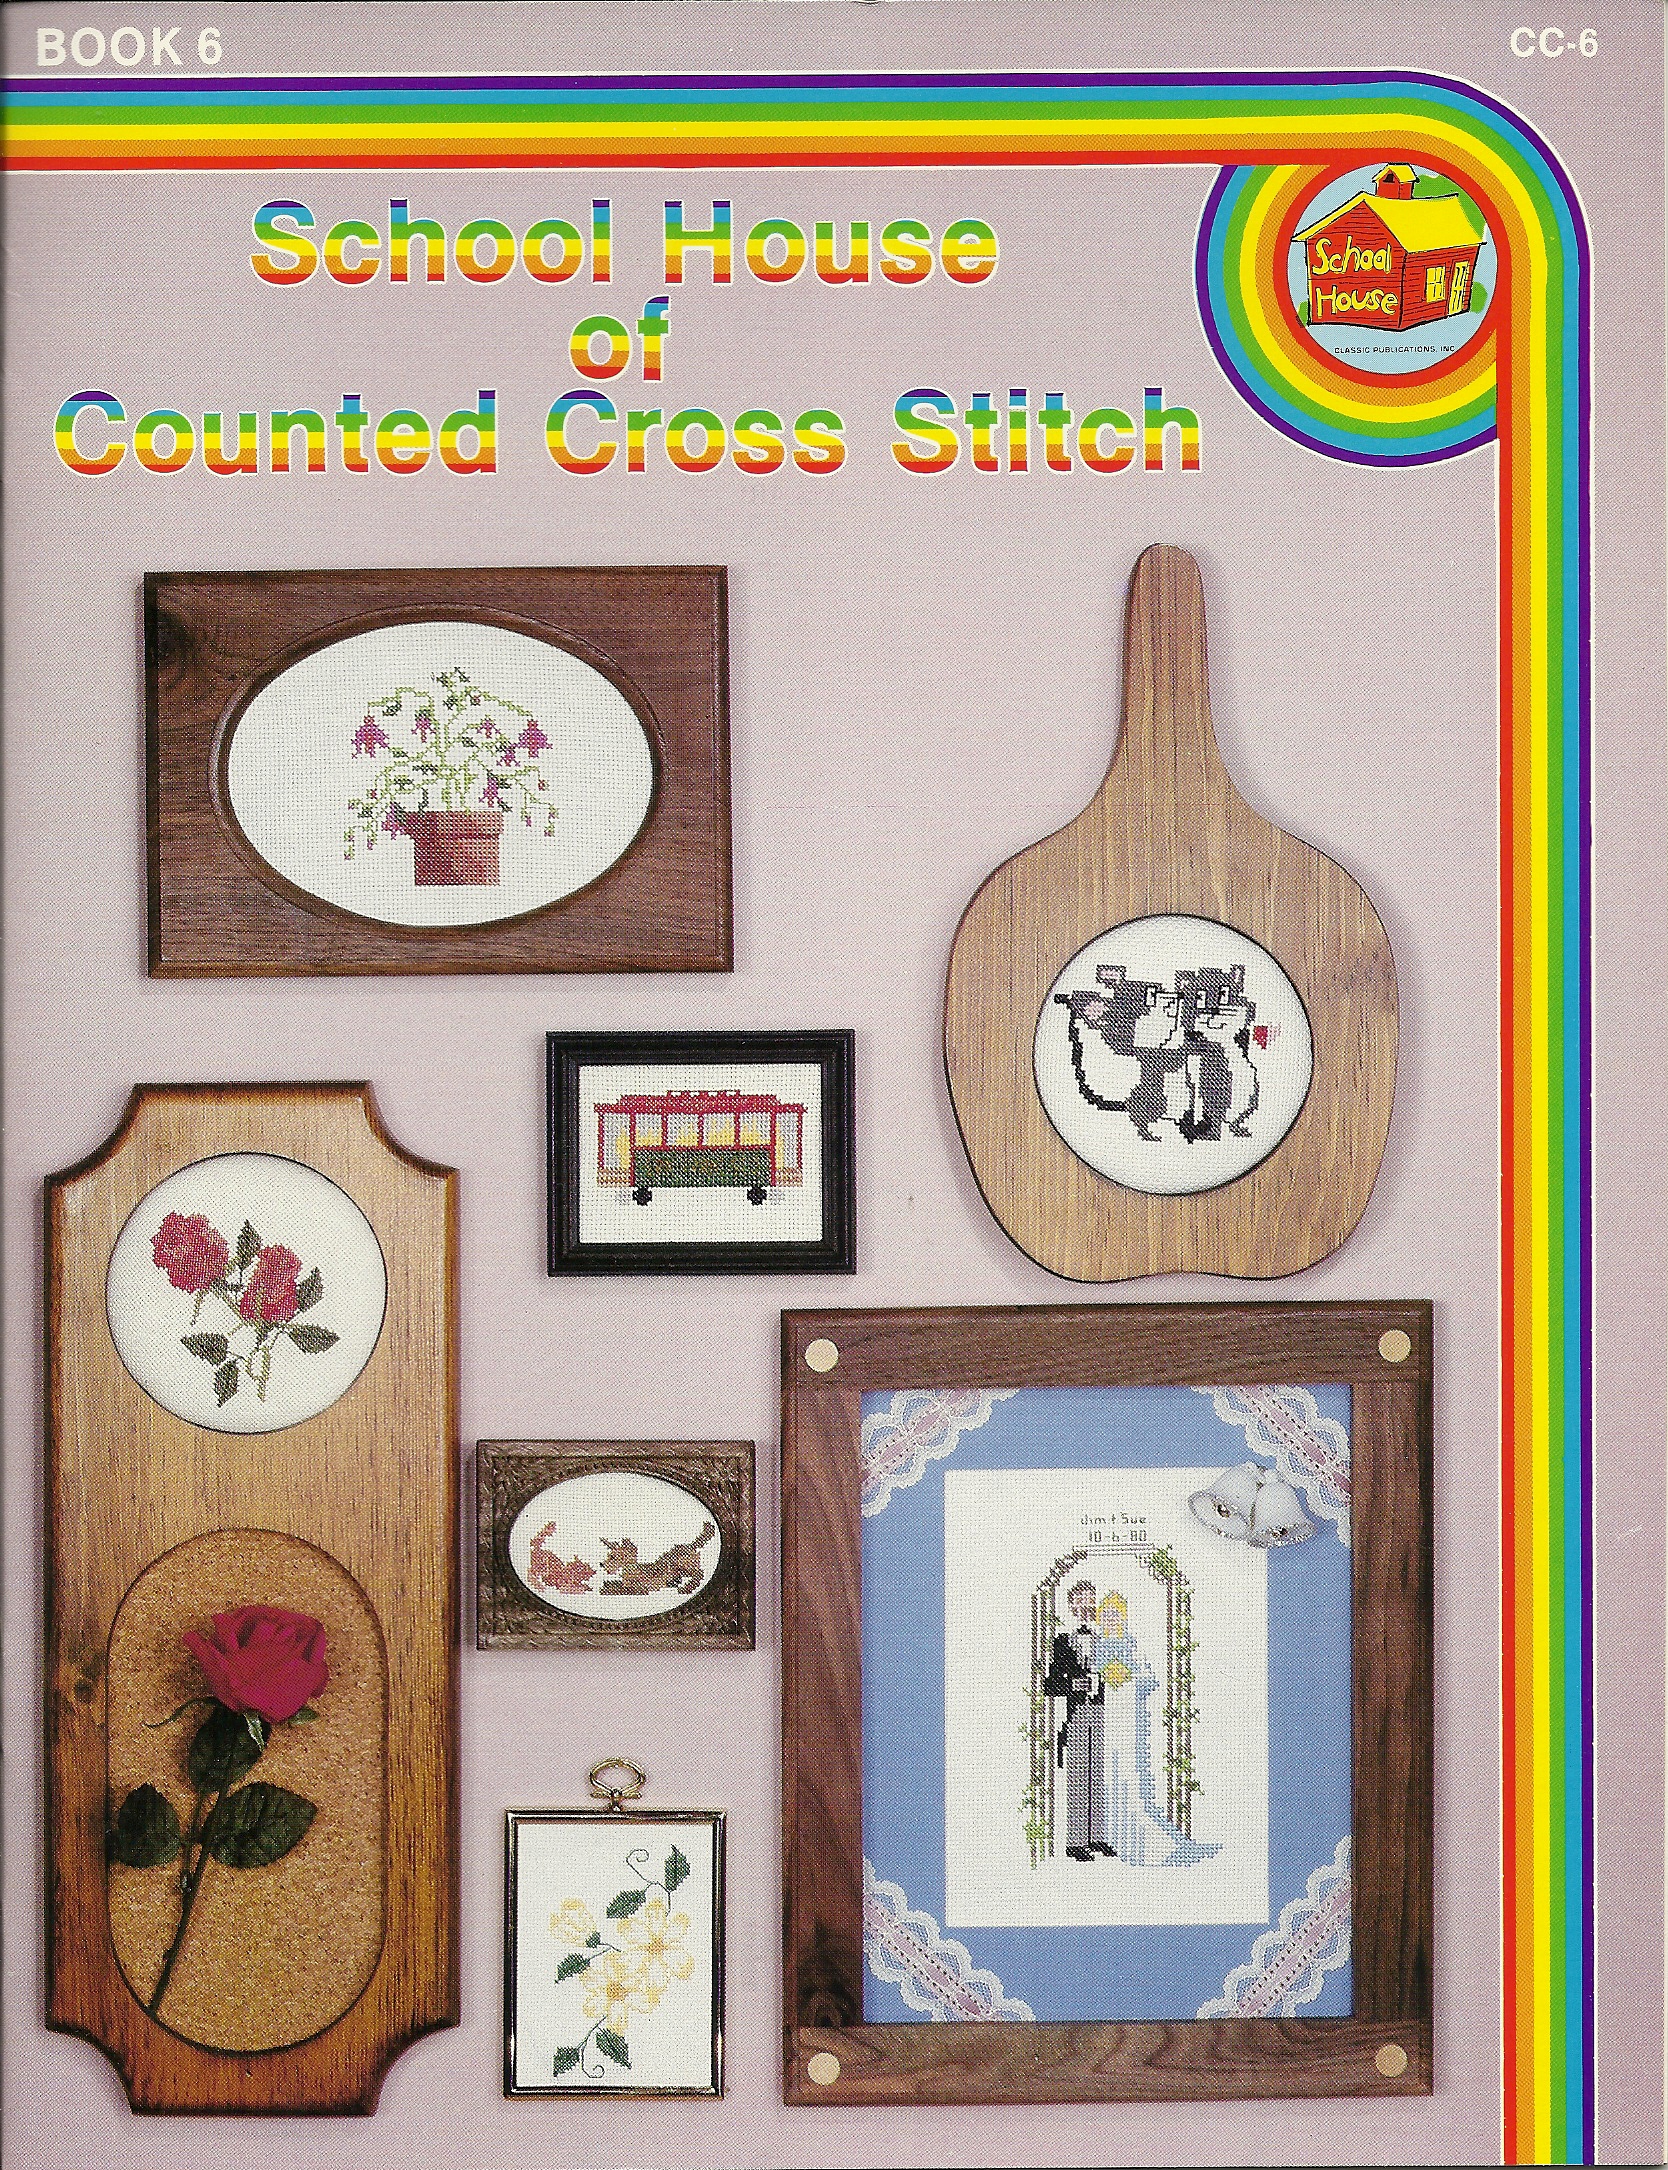 School House of Counted Cross Stitch  Book 6